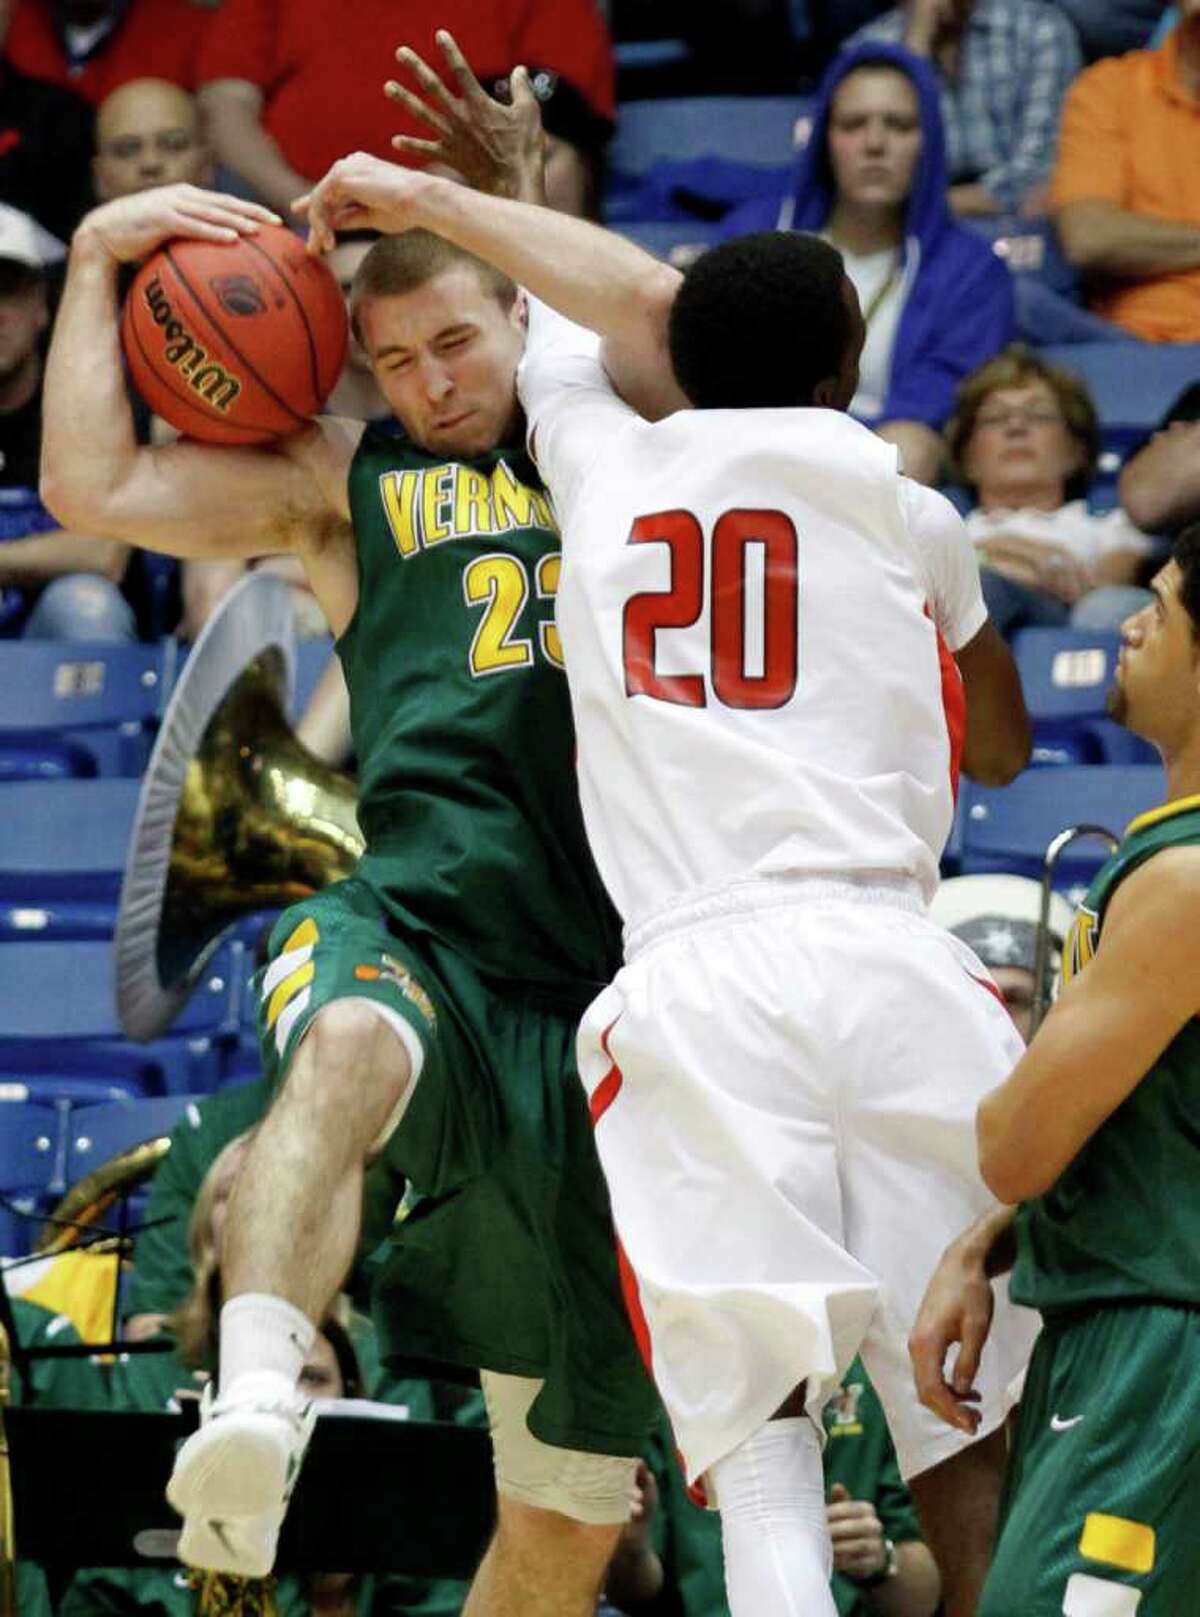 Vermont forward Brian Voelkel (23) fights for a rebound with Lamar guard Brandon Davis (20) during the first half of an NCAA tournament first-round college basketball game, Wednesday, March 14, 2012, in Dayton, Ohio. (AP Photo/Skip Peterson)